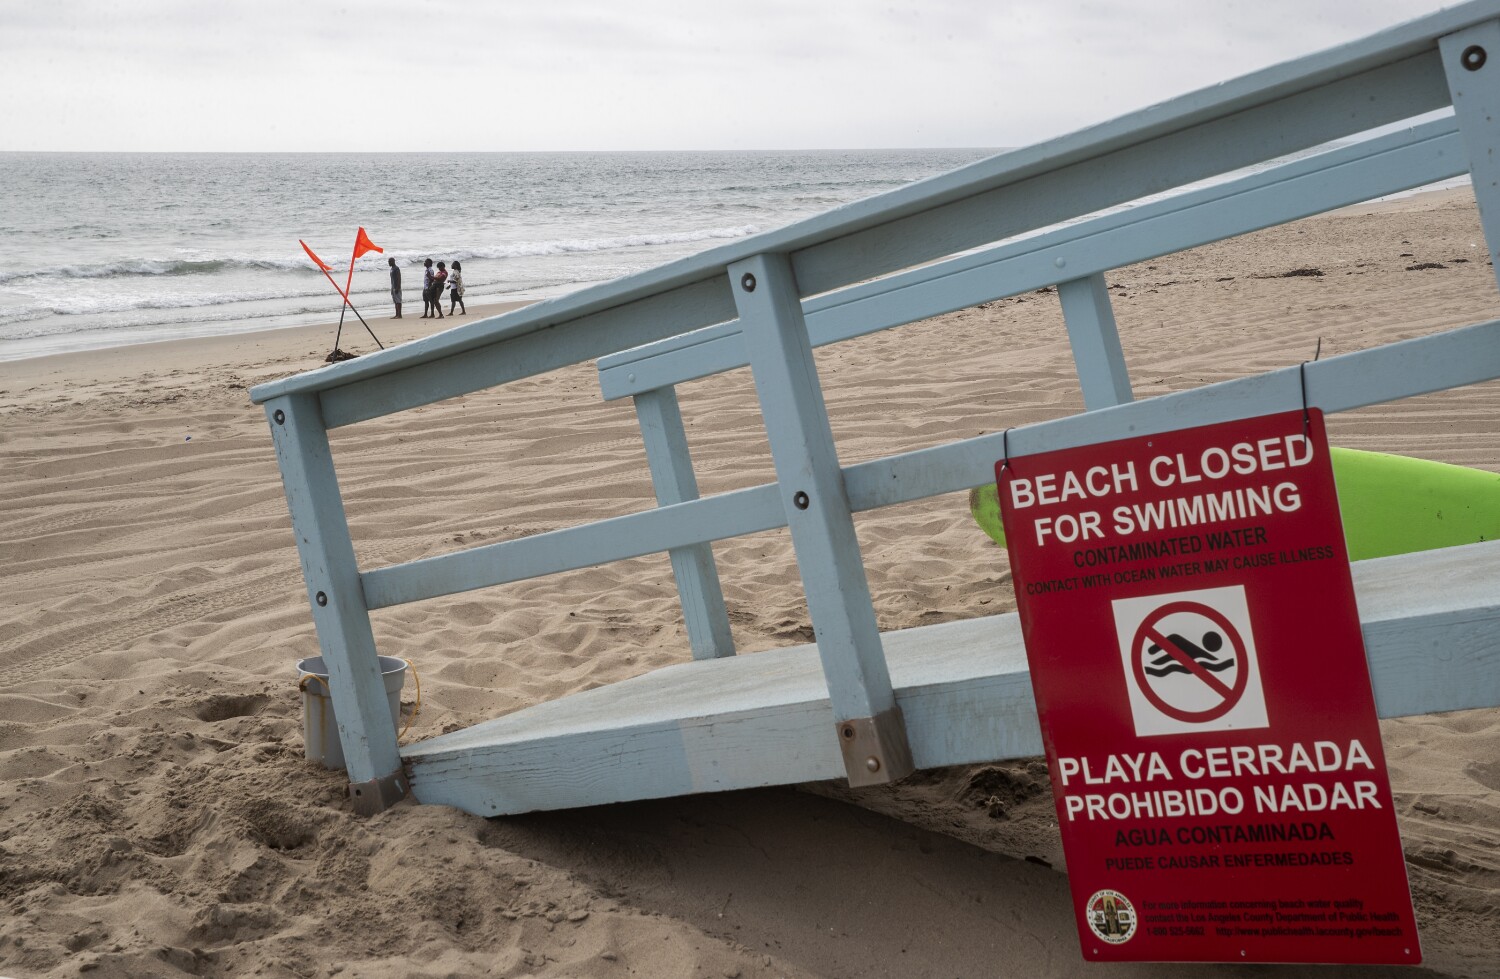 17 million gallons of sewage discharged from Hyperion treatment plant, closing some beaches to swimming